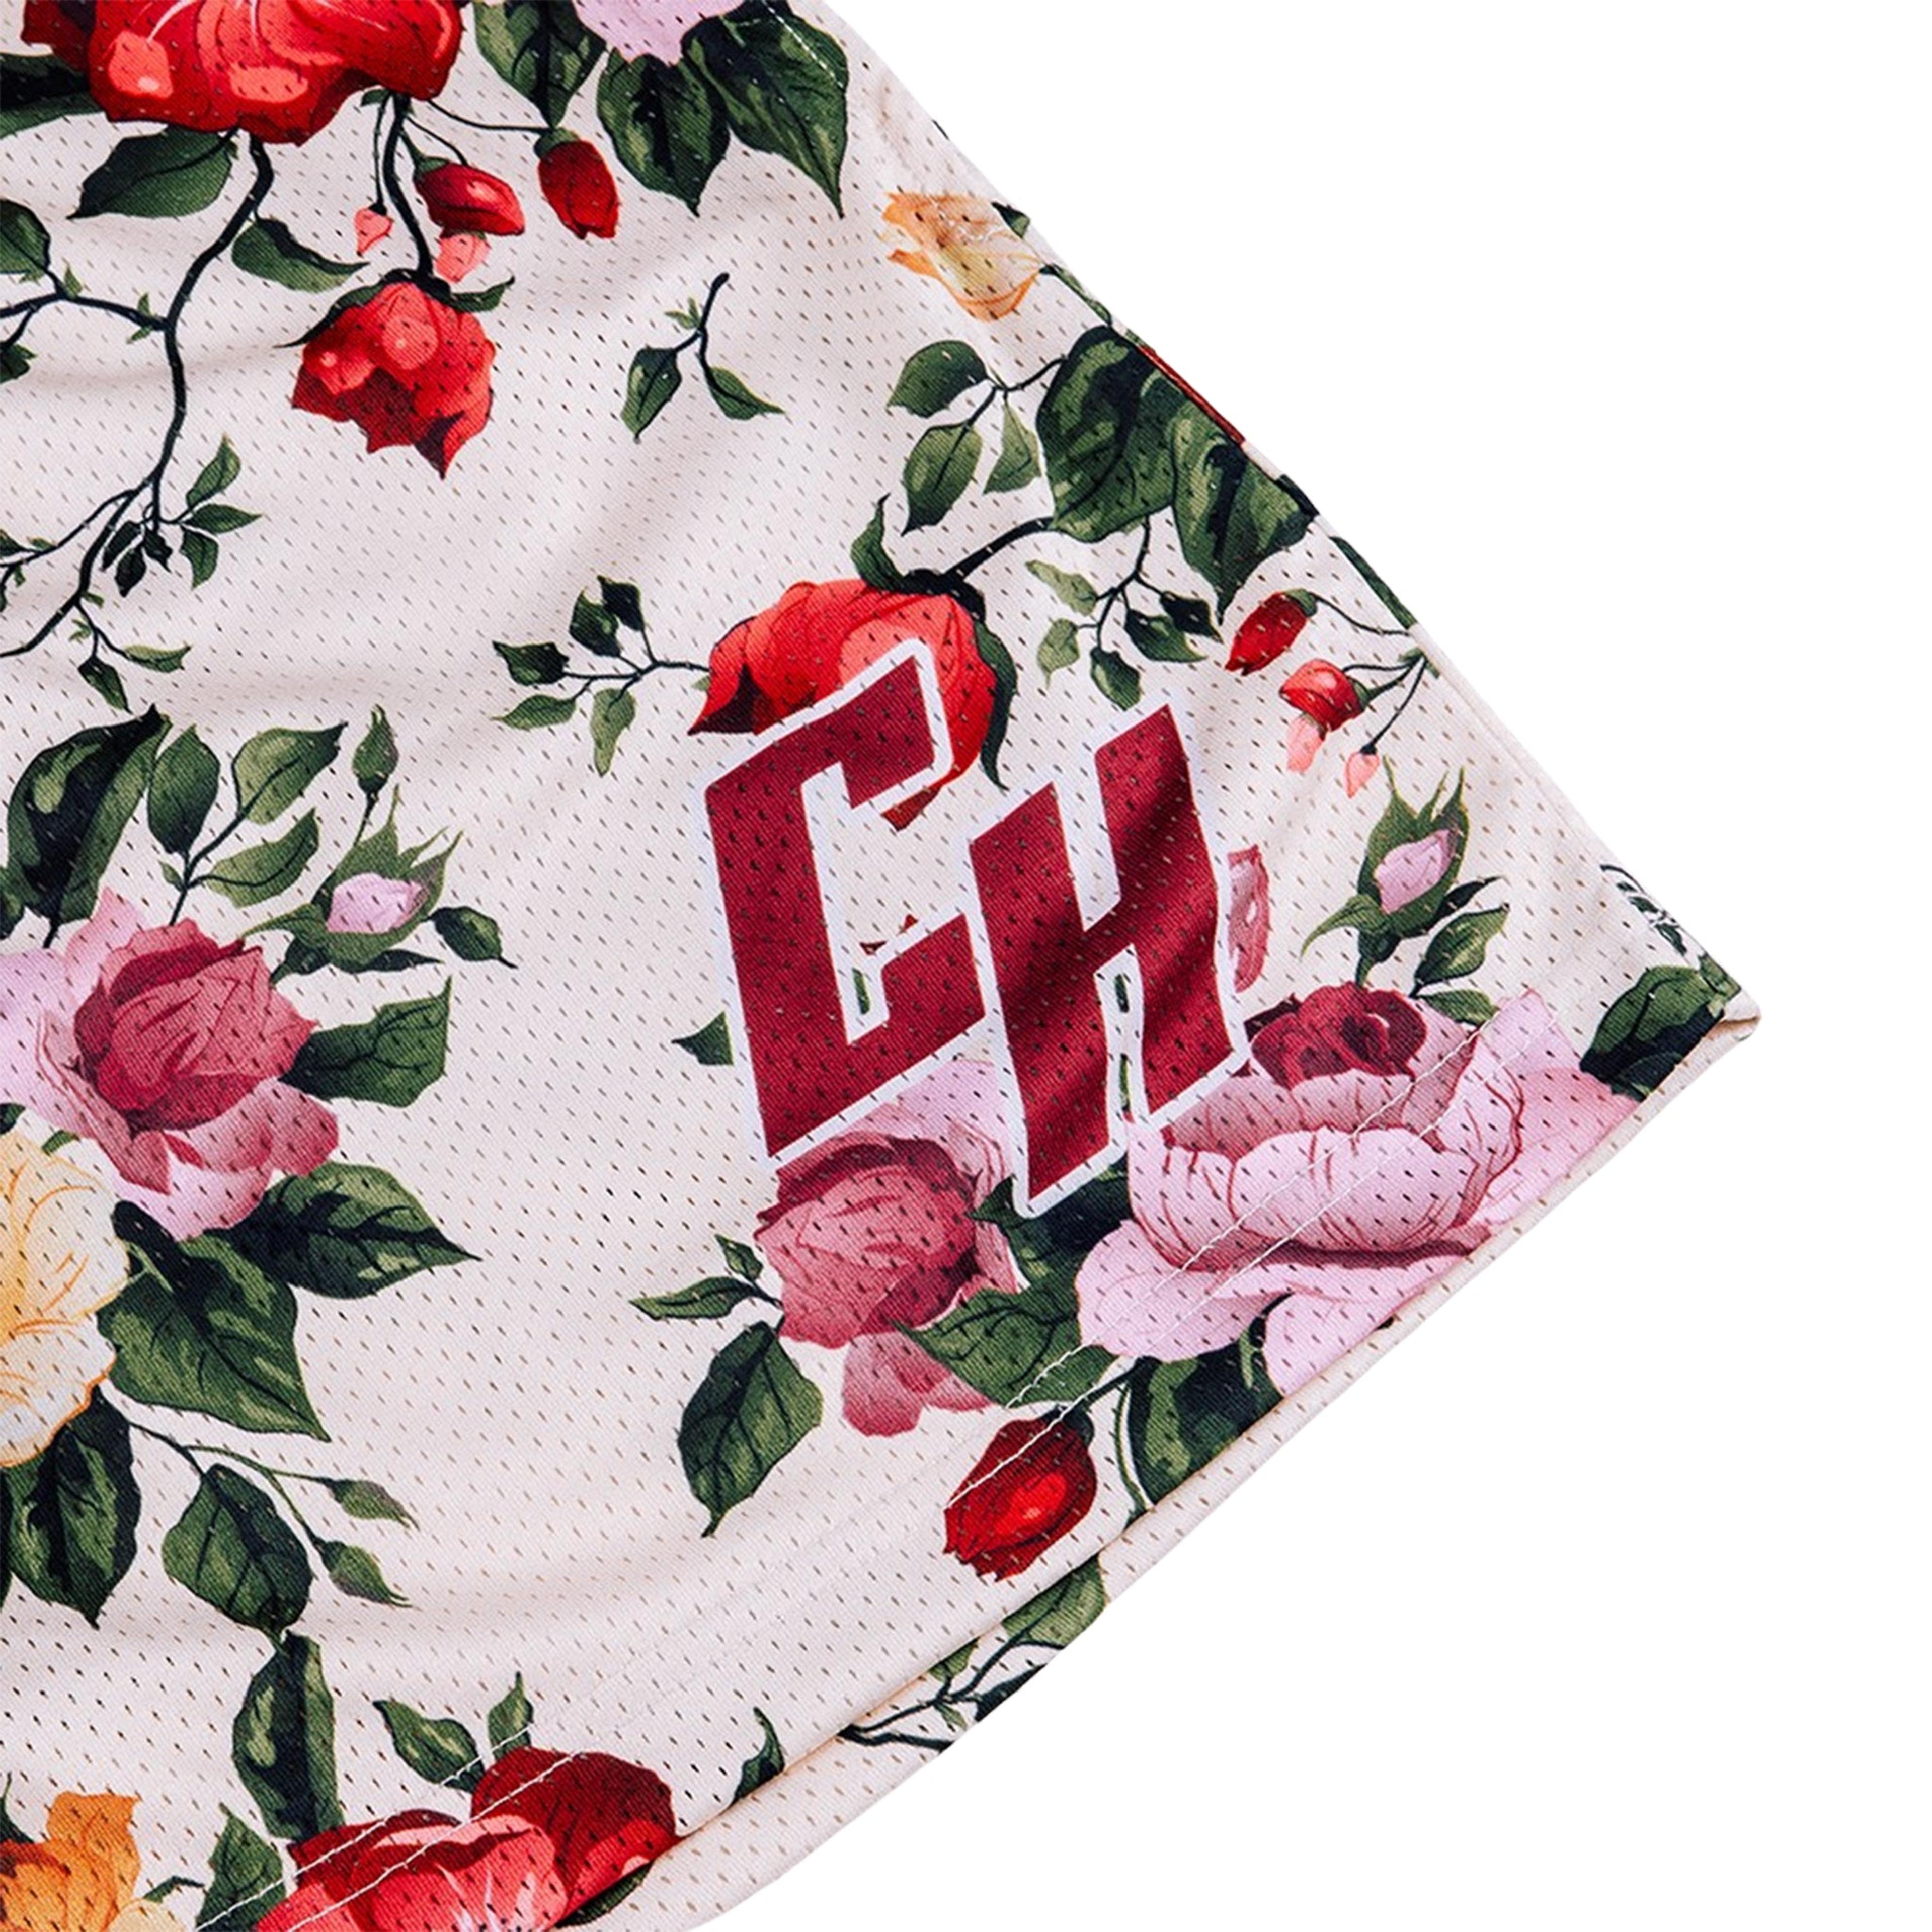 Alternate View 1 of Common Hype Cream Floral Short